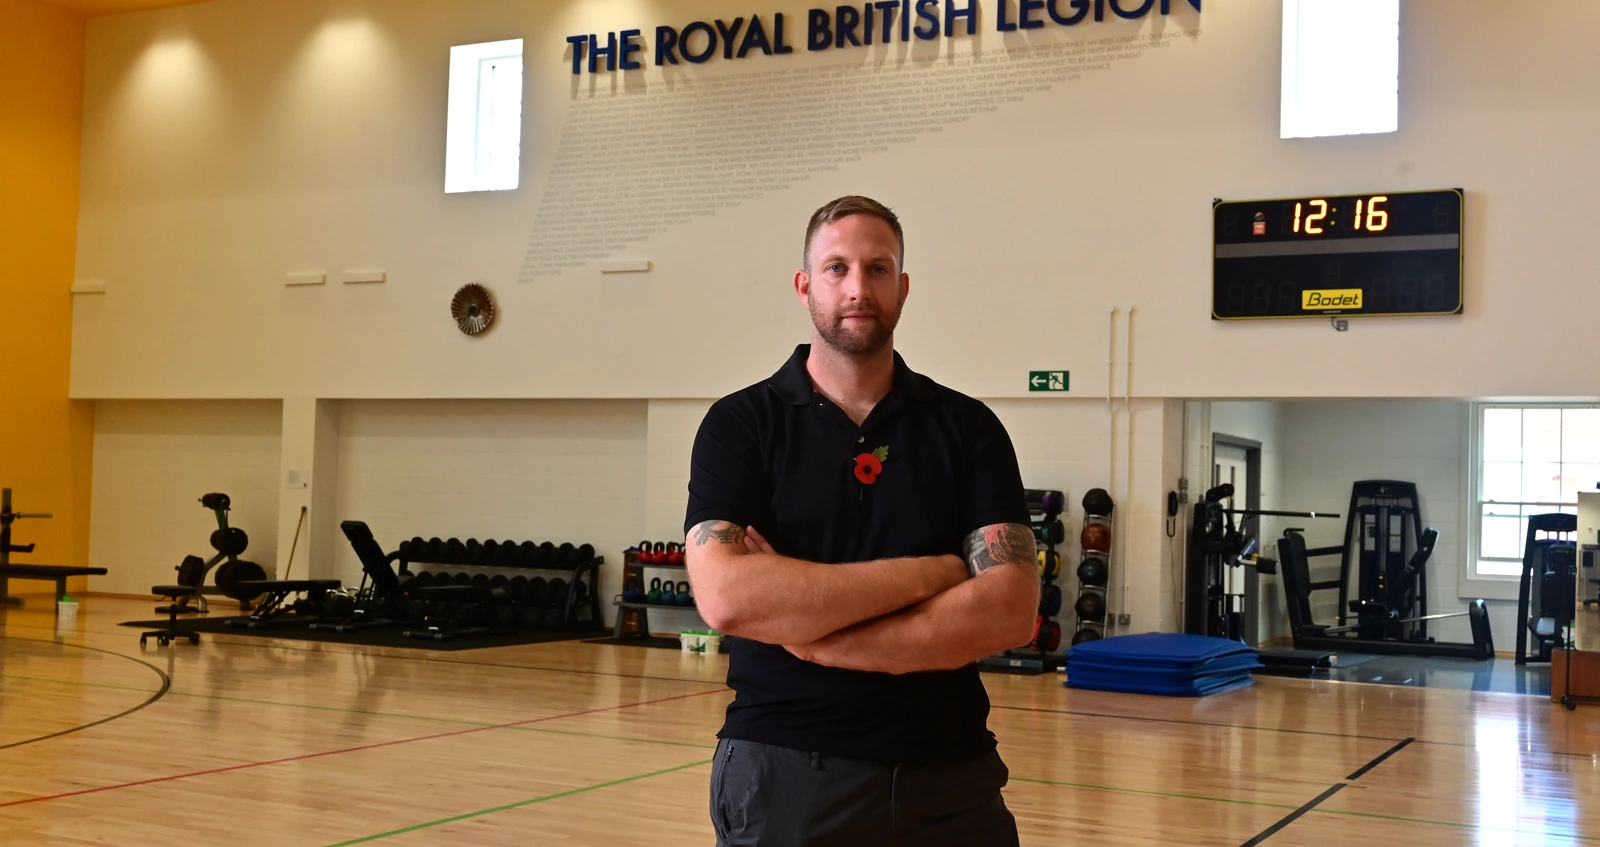 Andy Barlow standing in The Royal British legion gym